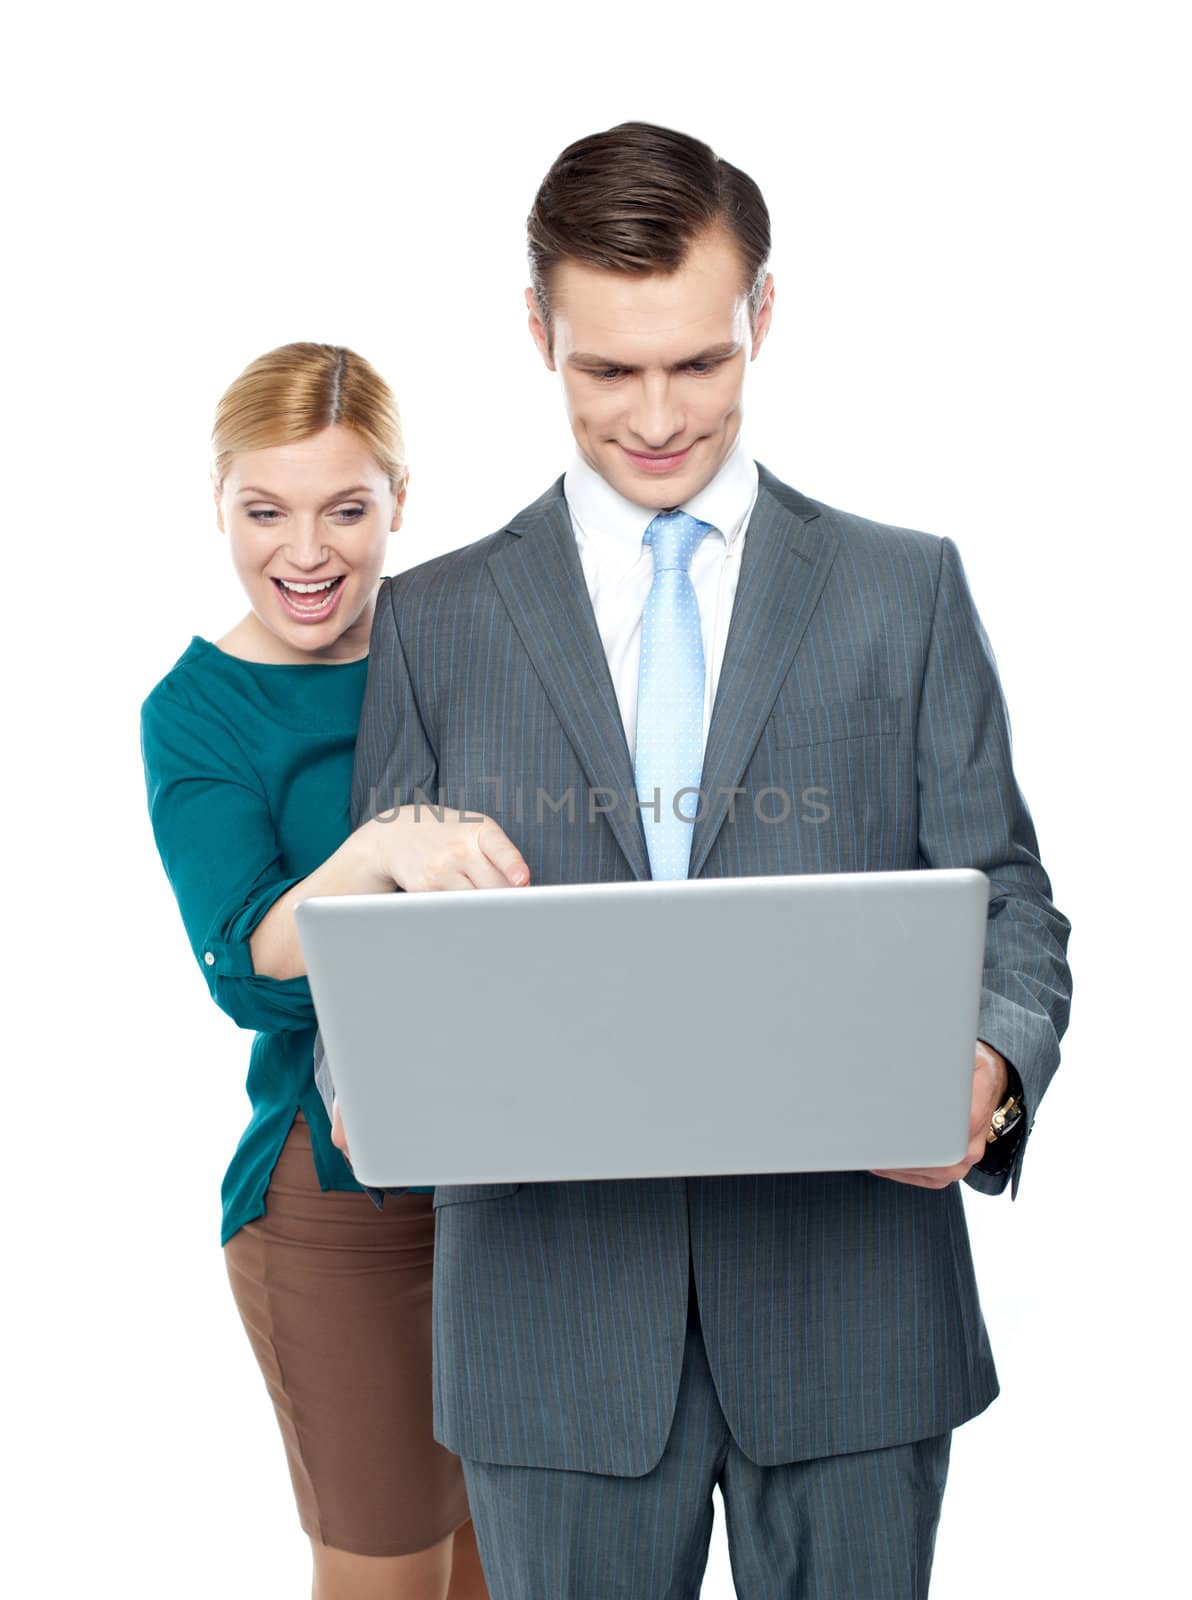 Smiling business people using laptop isolated against white background